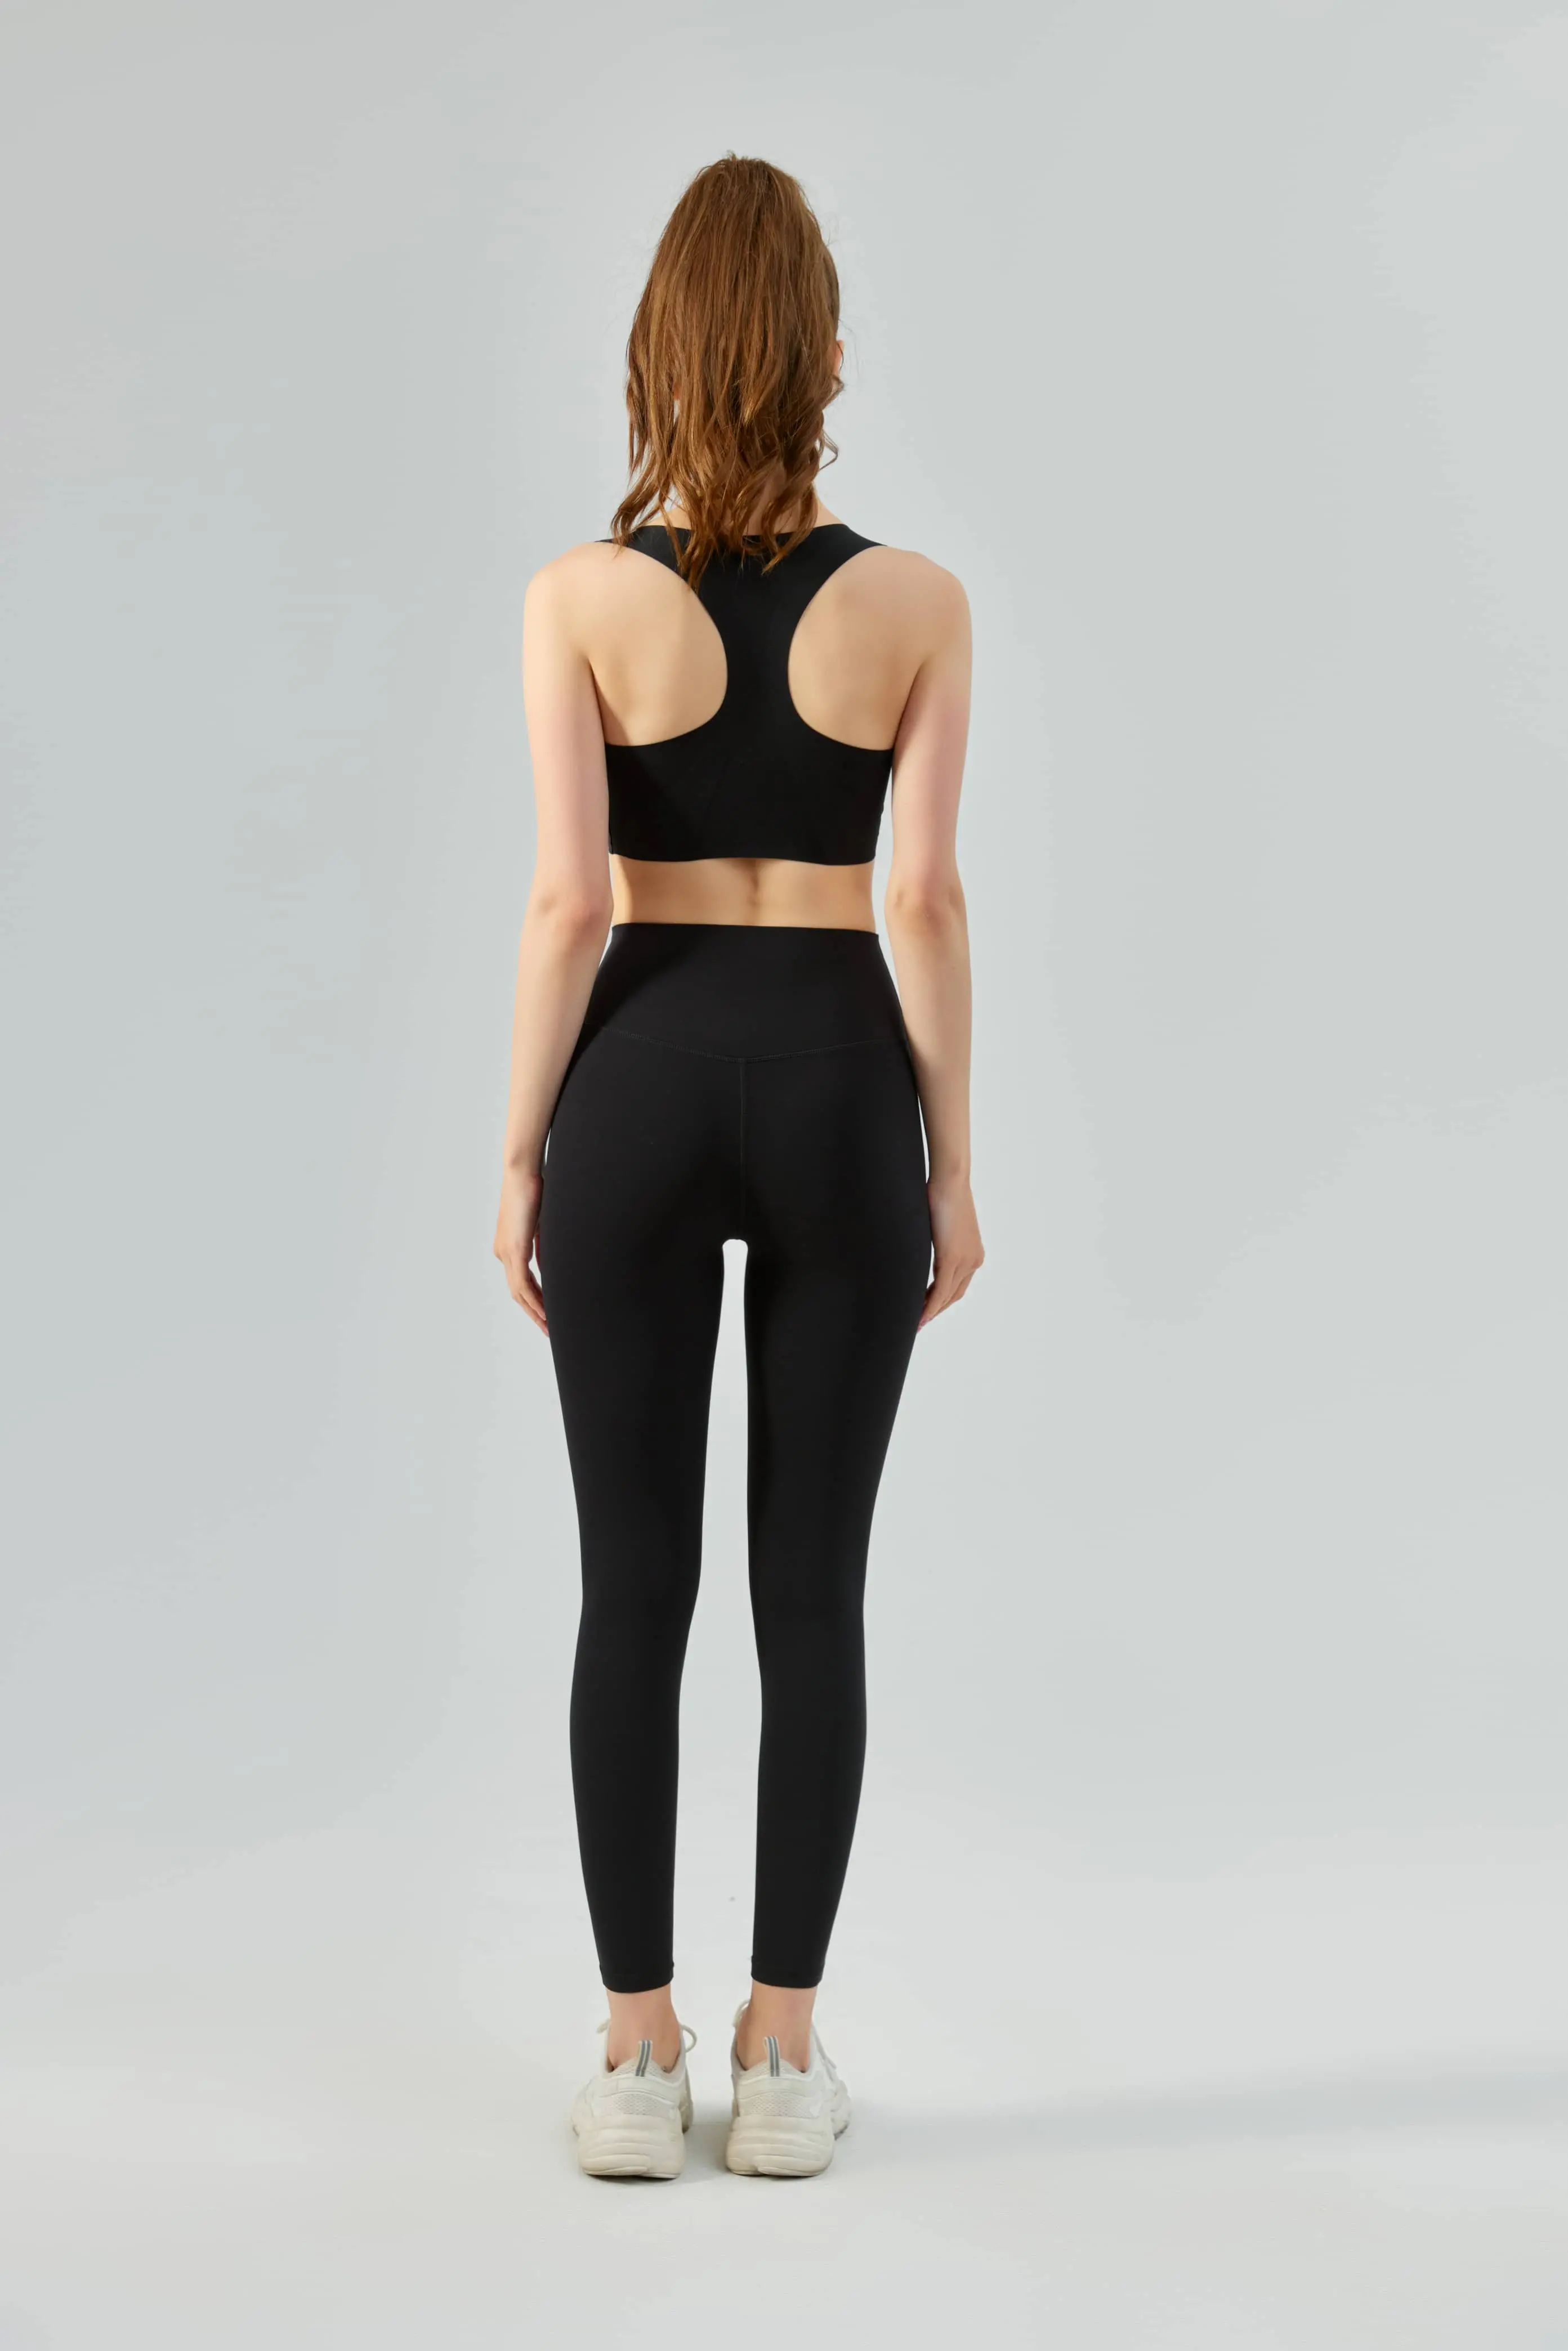 Aprilluck's Yoga Clothes for Women Over 60 - Experience Comfort